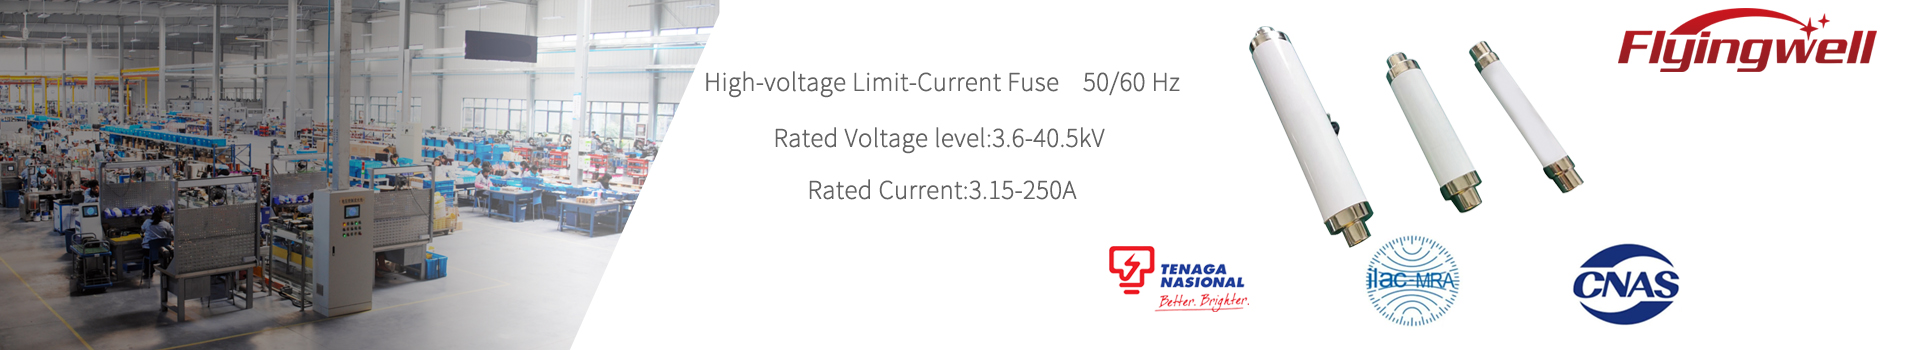 Limited-Current Fuse